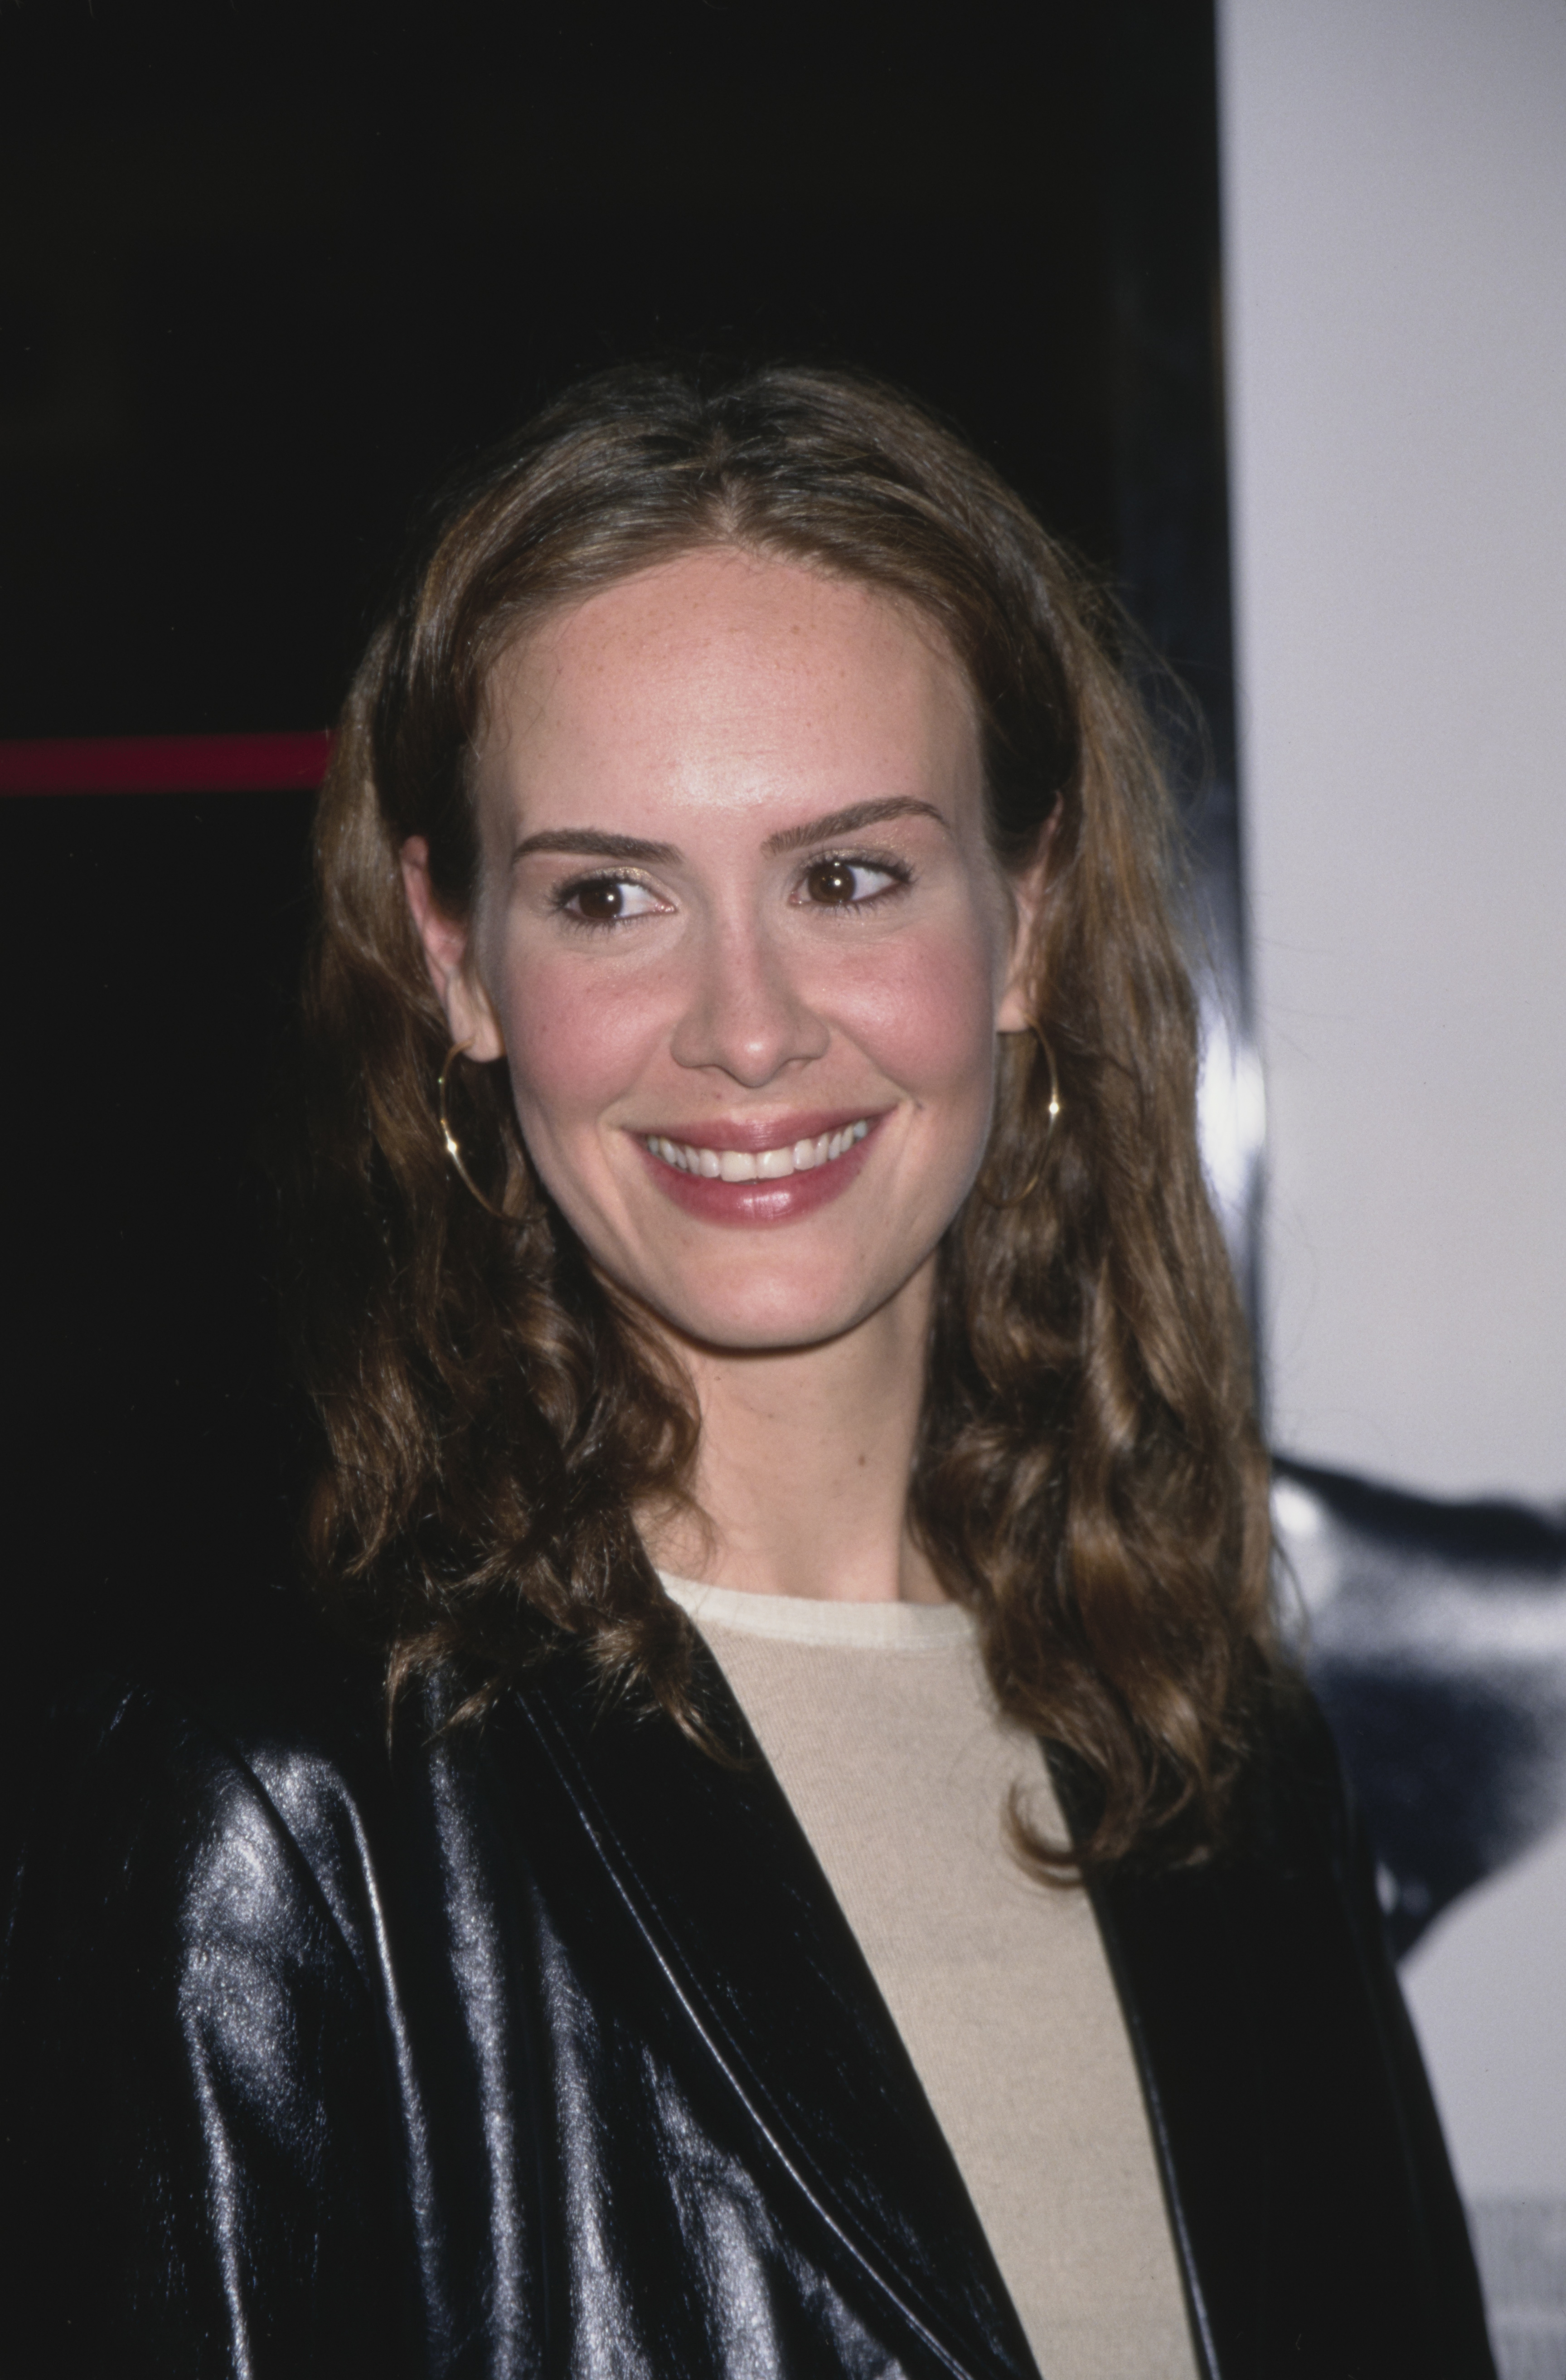 The actress at the premiere of "Get Carter" in Los Angeles, California, on October 4, 2000. | Source: Getty Images